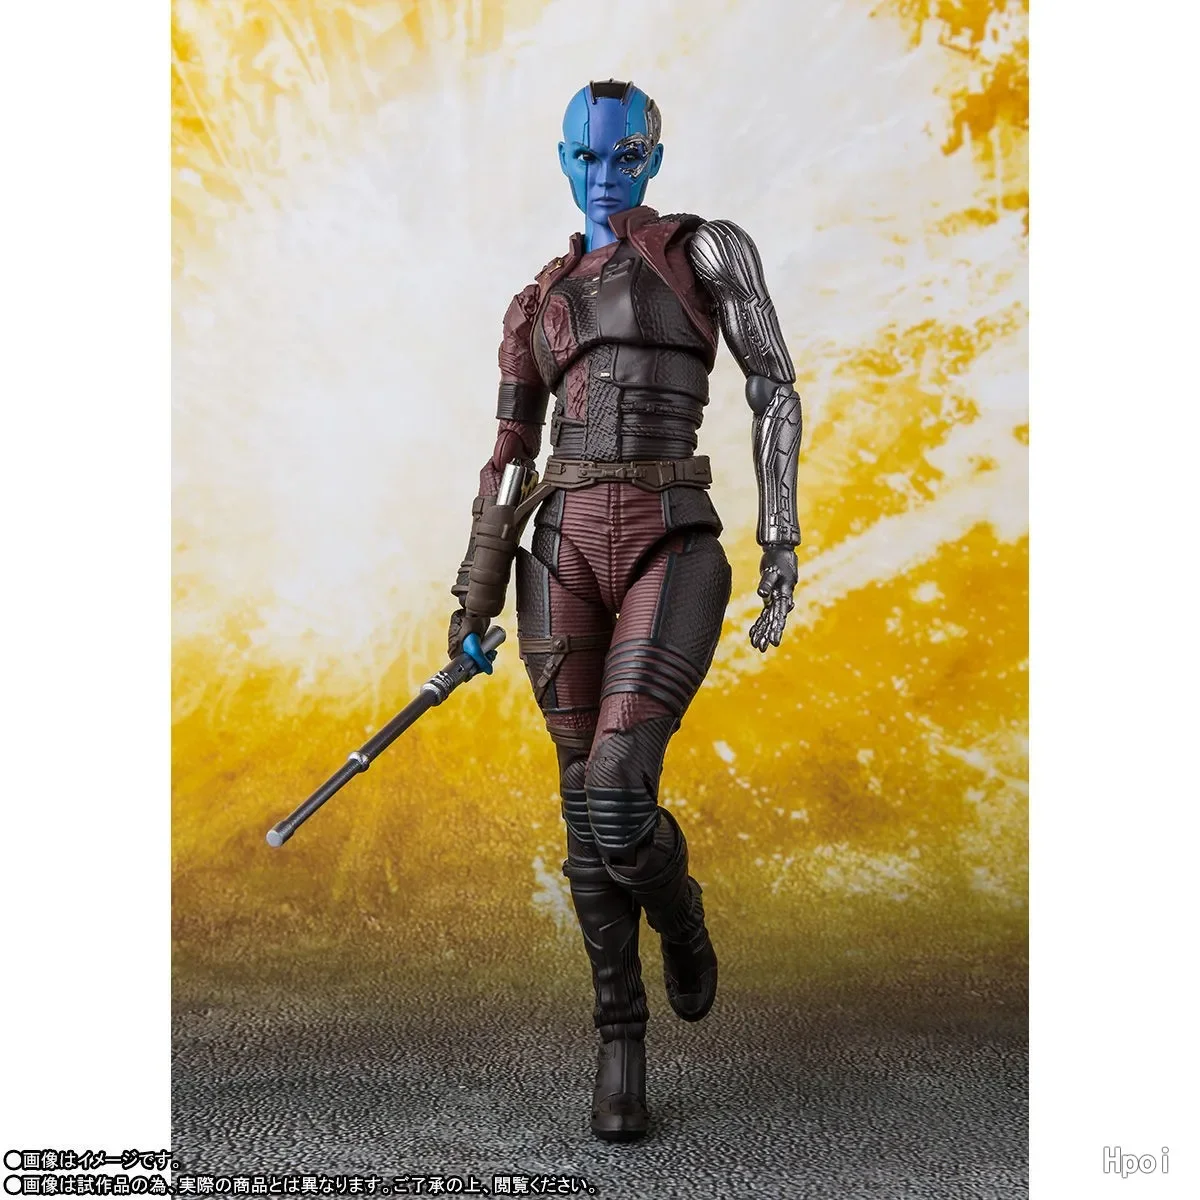 

Original Bandai Nebula Action Figure Shf Figure Guardians Of The Galaxy The Avengers Marvel Toy Children Gift In Stock